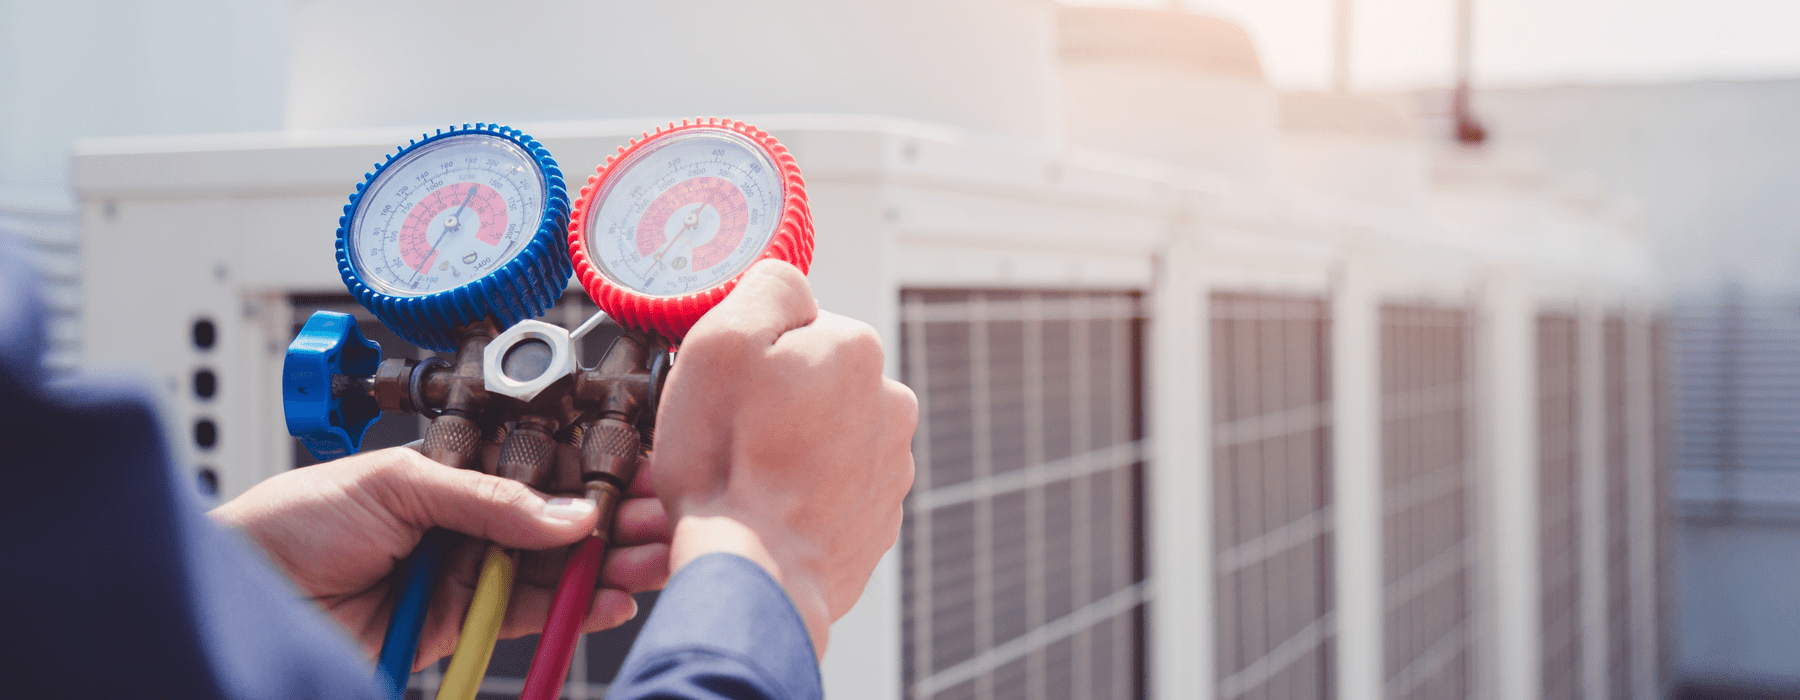 Common Warning Signs that Your Air Conditioning System Needs Maintenance